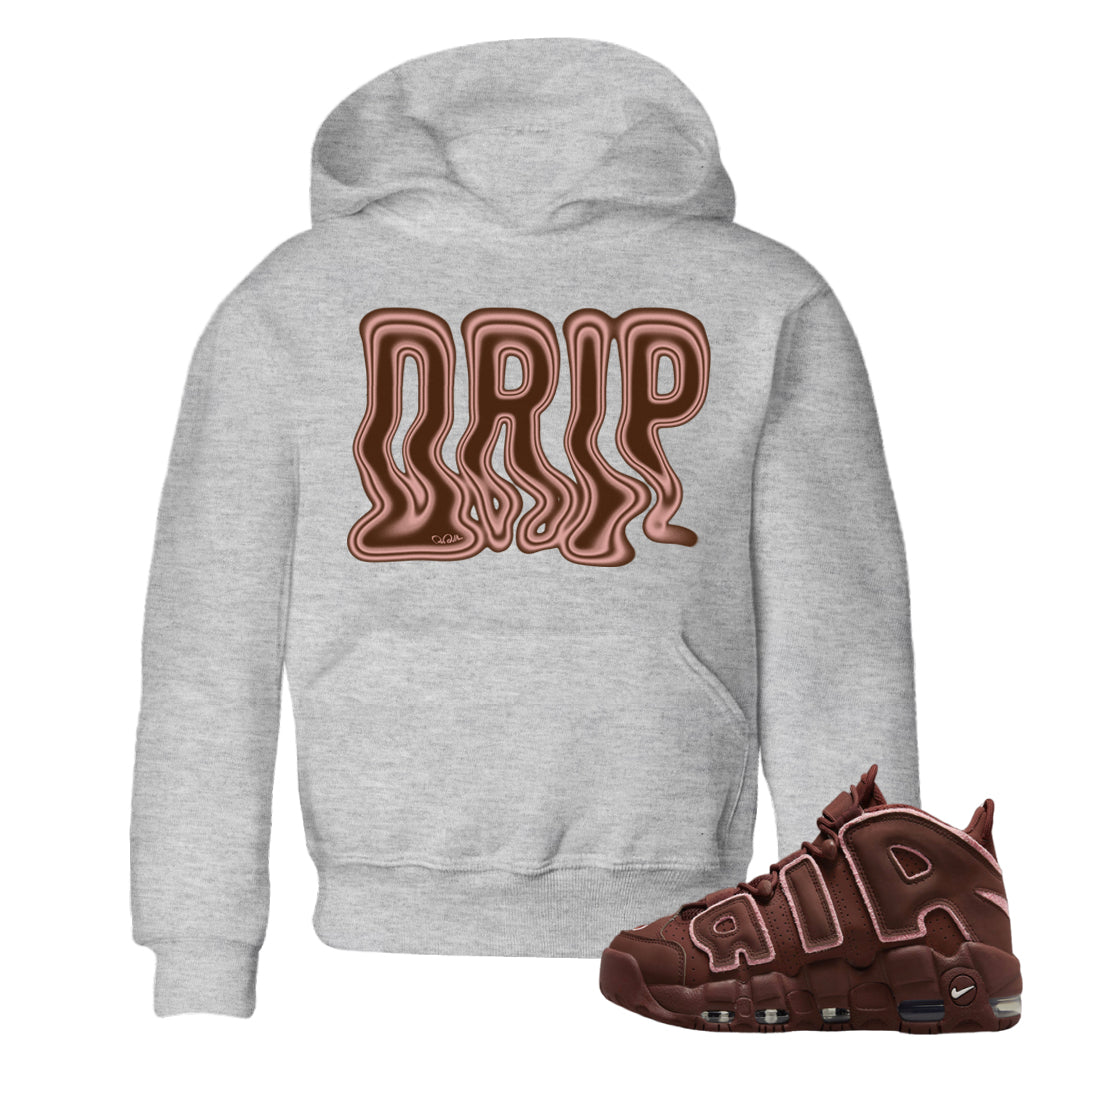 Air More Uptempo Valentines Day Sneaker Tees Drip Gear Zone Drip Sneaker Tees Nike Uptempo Valentines Day Shirt Kids Shirts Heather Grey 1